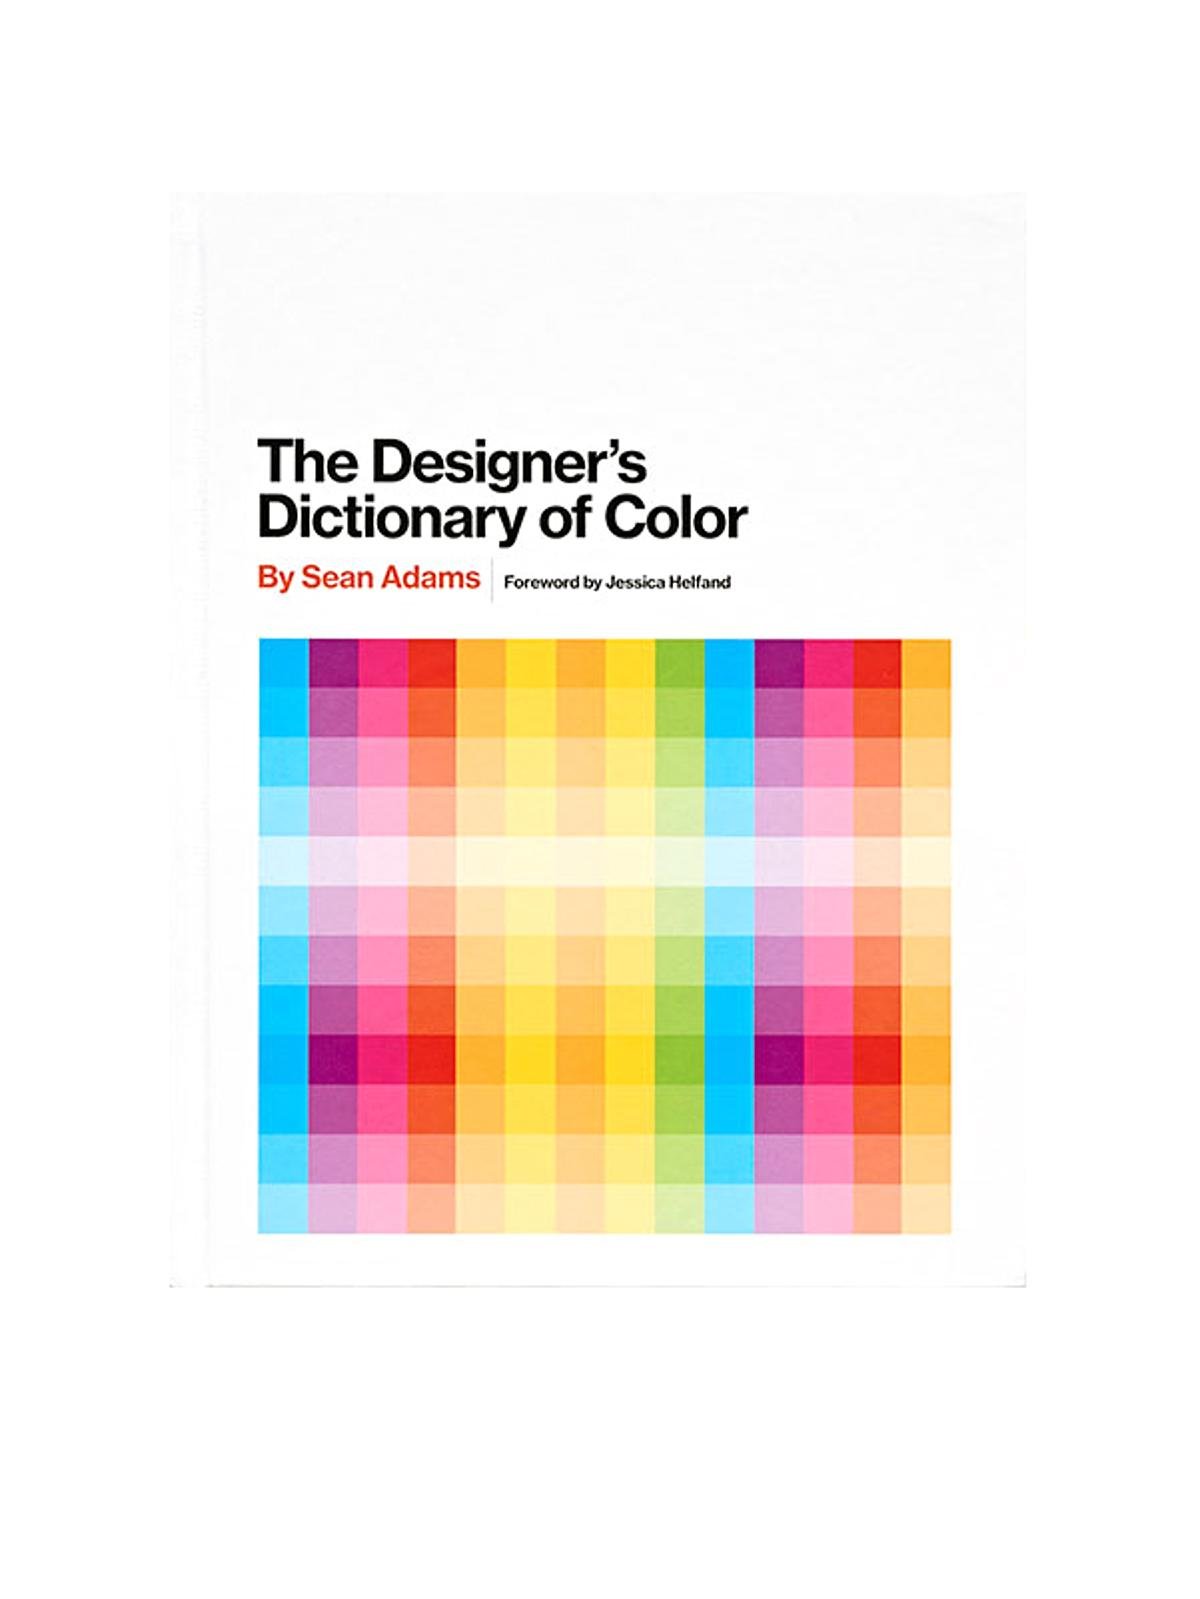 Abrams Books - The Designer's Dictionary of Color